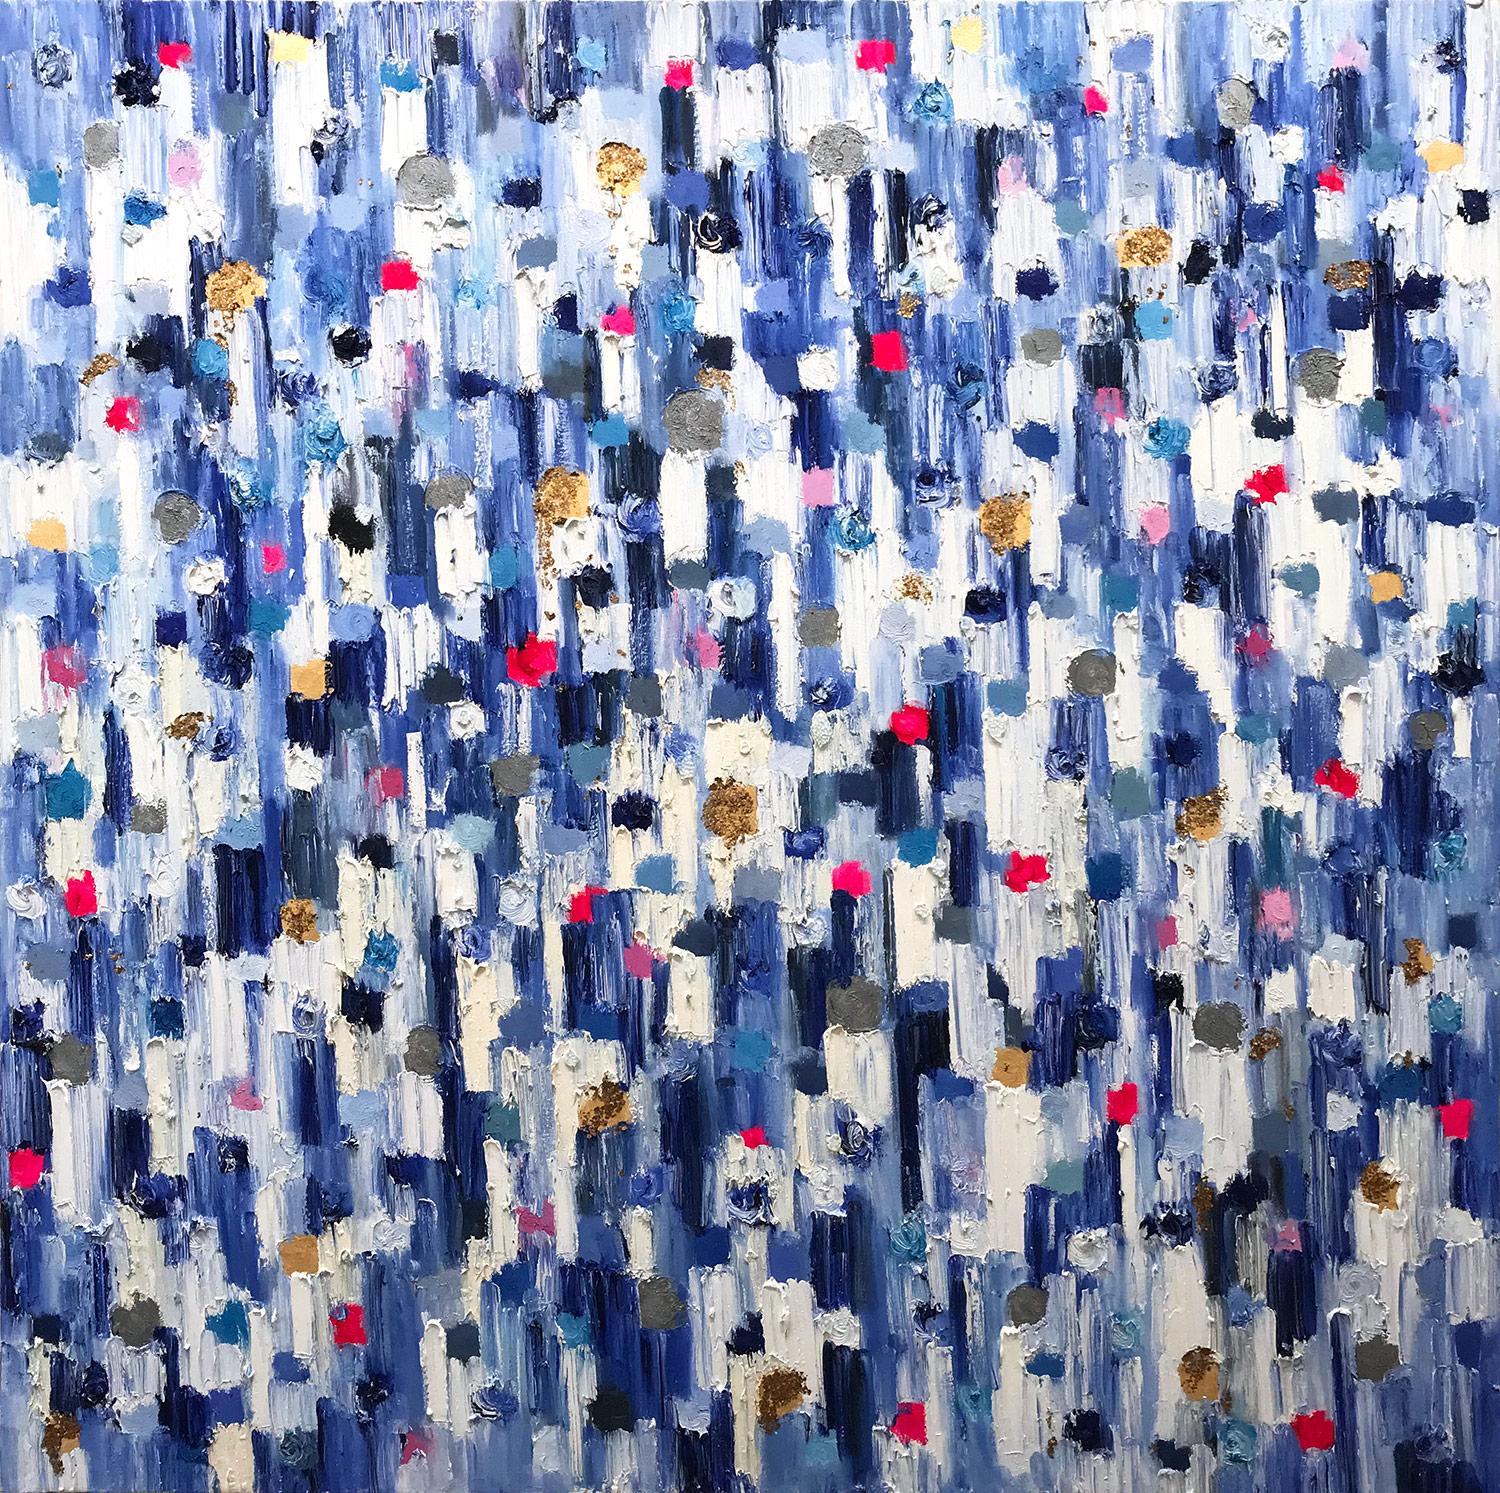 Cindy Shaoul Abstract Painting - "Dripping Dots - Palma" Colorful Abstract Oil Painting on Canvas